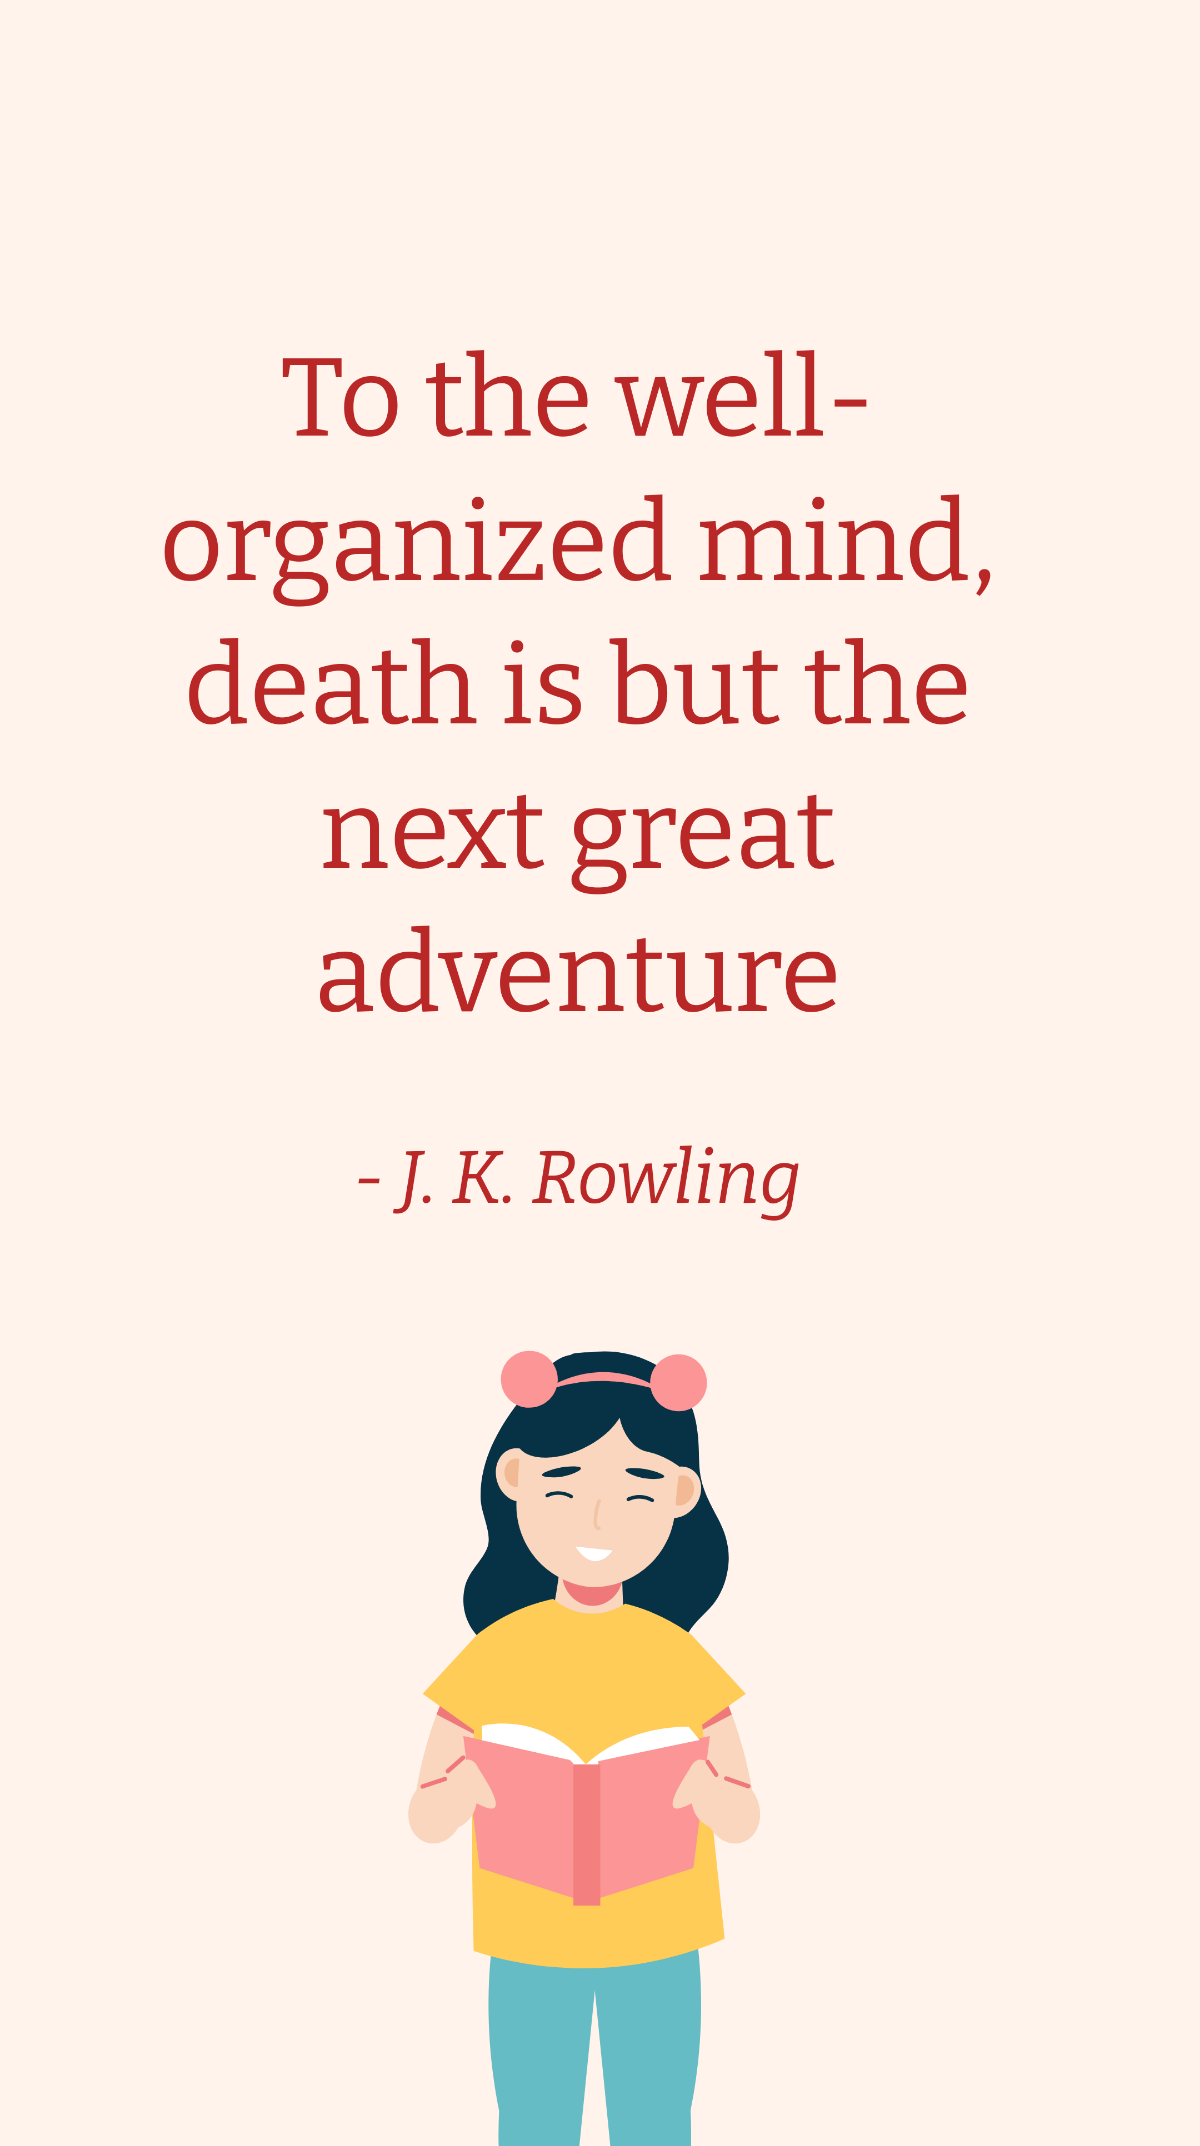 Free J. K. Rowling - To the well-organized mind, death is but the next great adventure Template